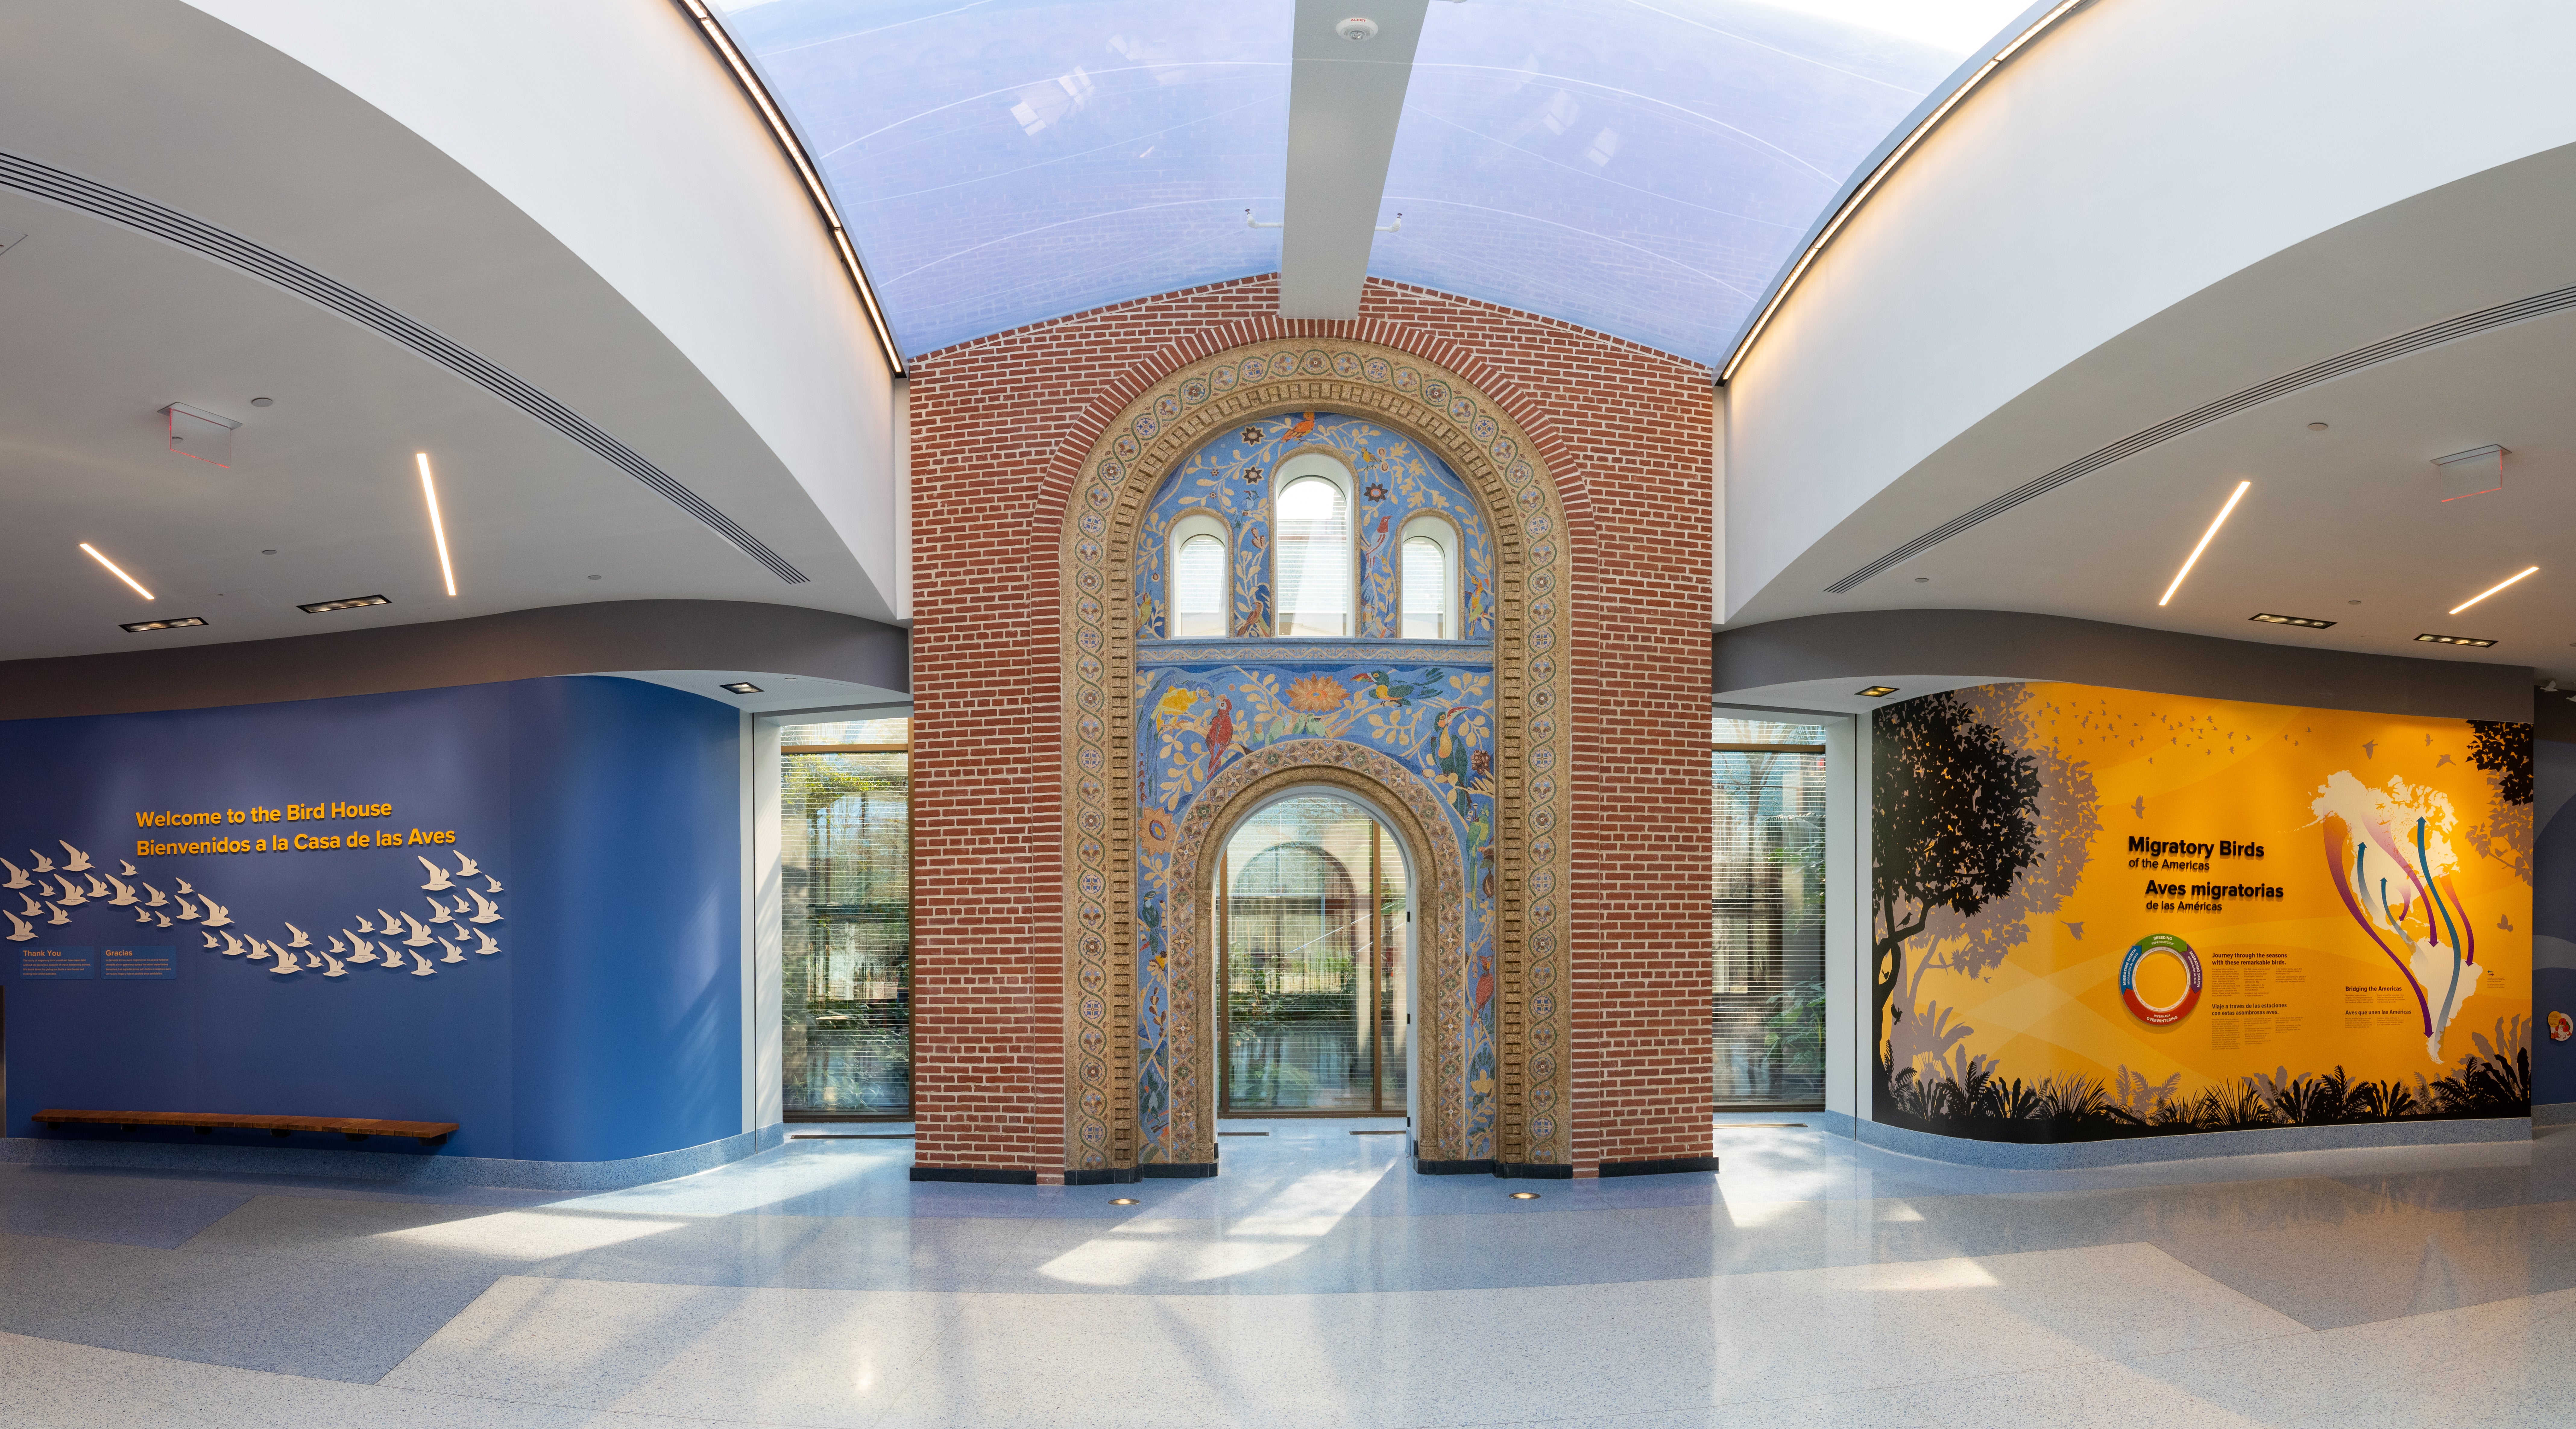 Upon entering the Bird House, visitors will observe a towering mosaic arch decorated with parrots, toucans, songbirds and other tropical species. This artwork was originally part of the 1928 front entrance to the Bird House. Designed and fabricated by loc